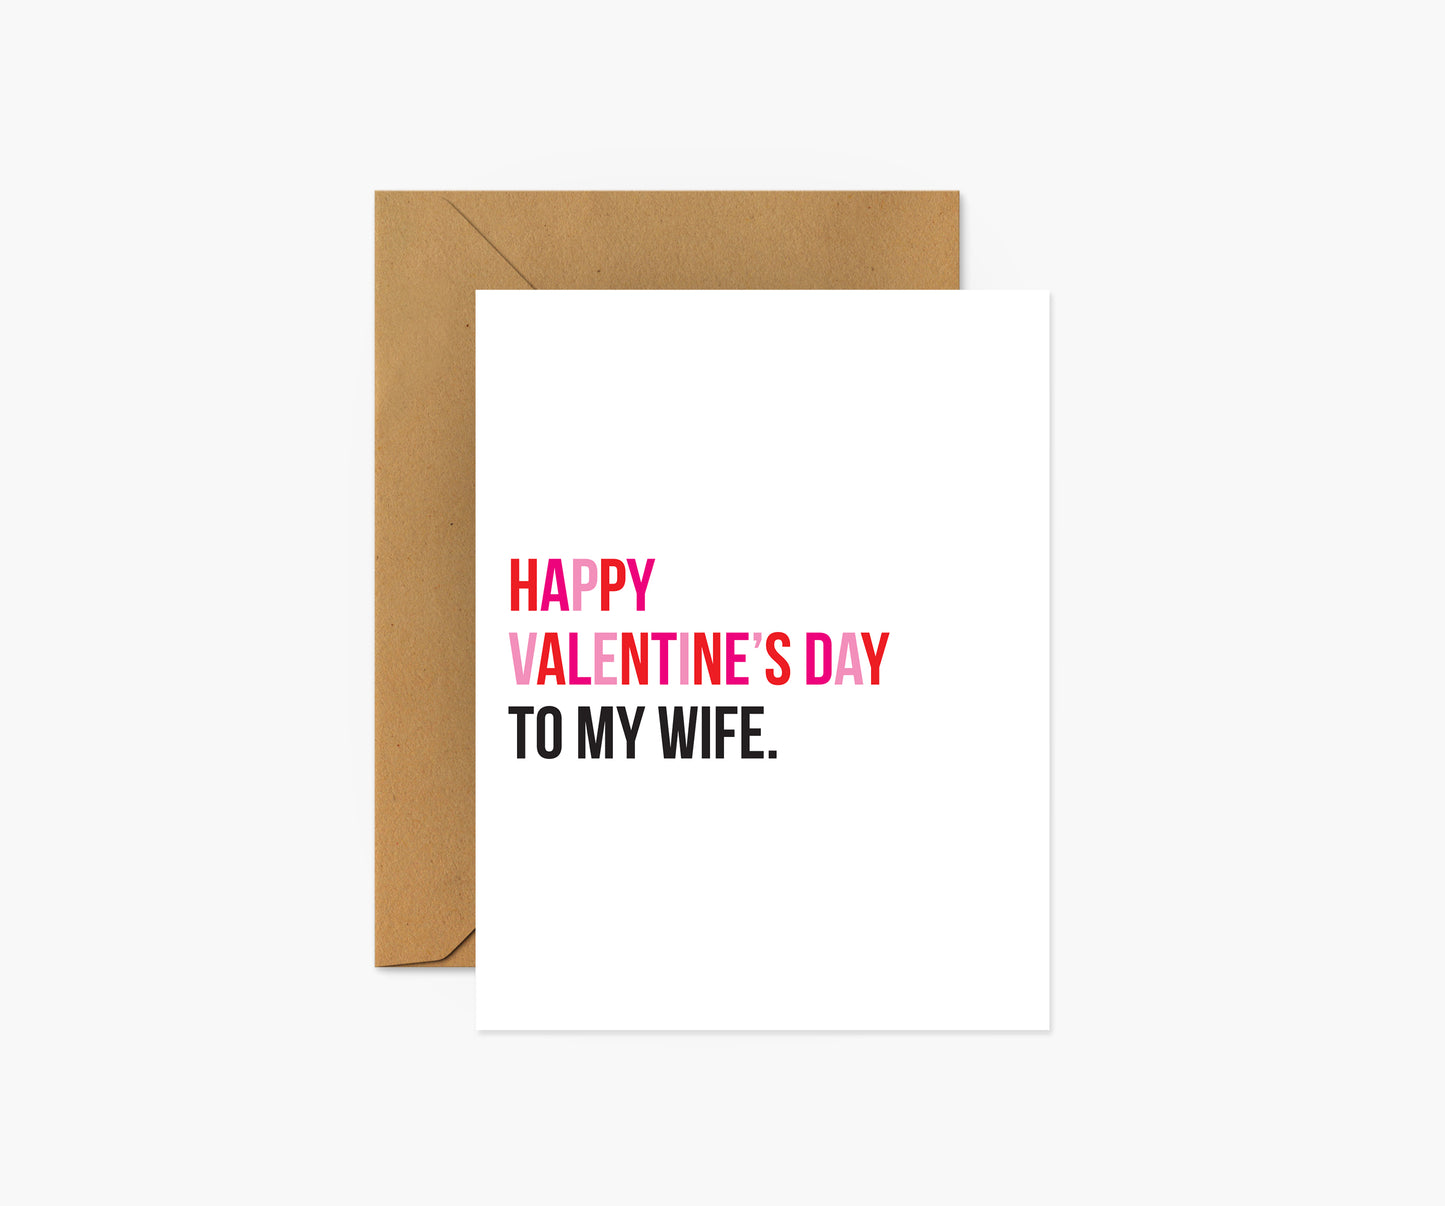 To My Wife - Valentine's Day Card | Footnotes Paper